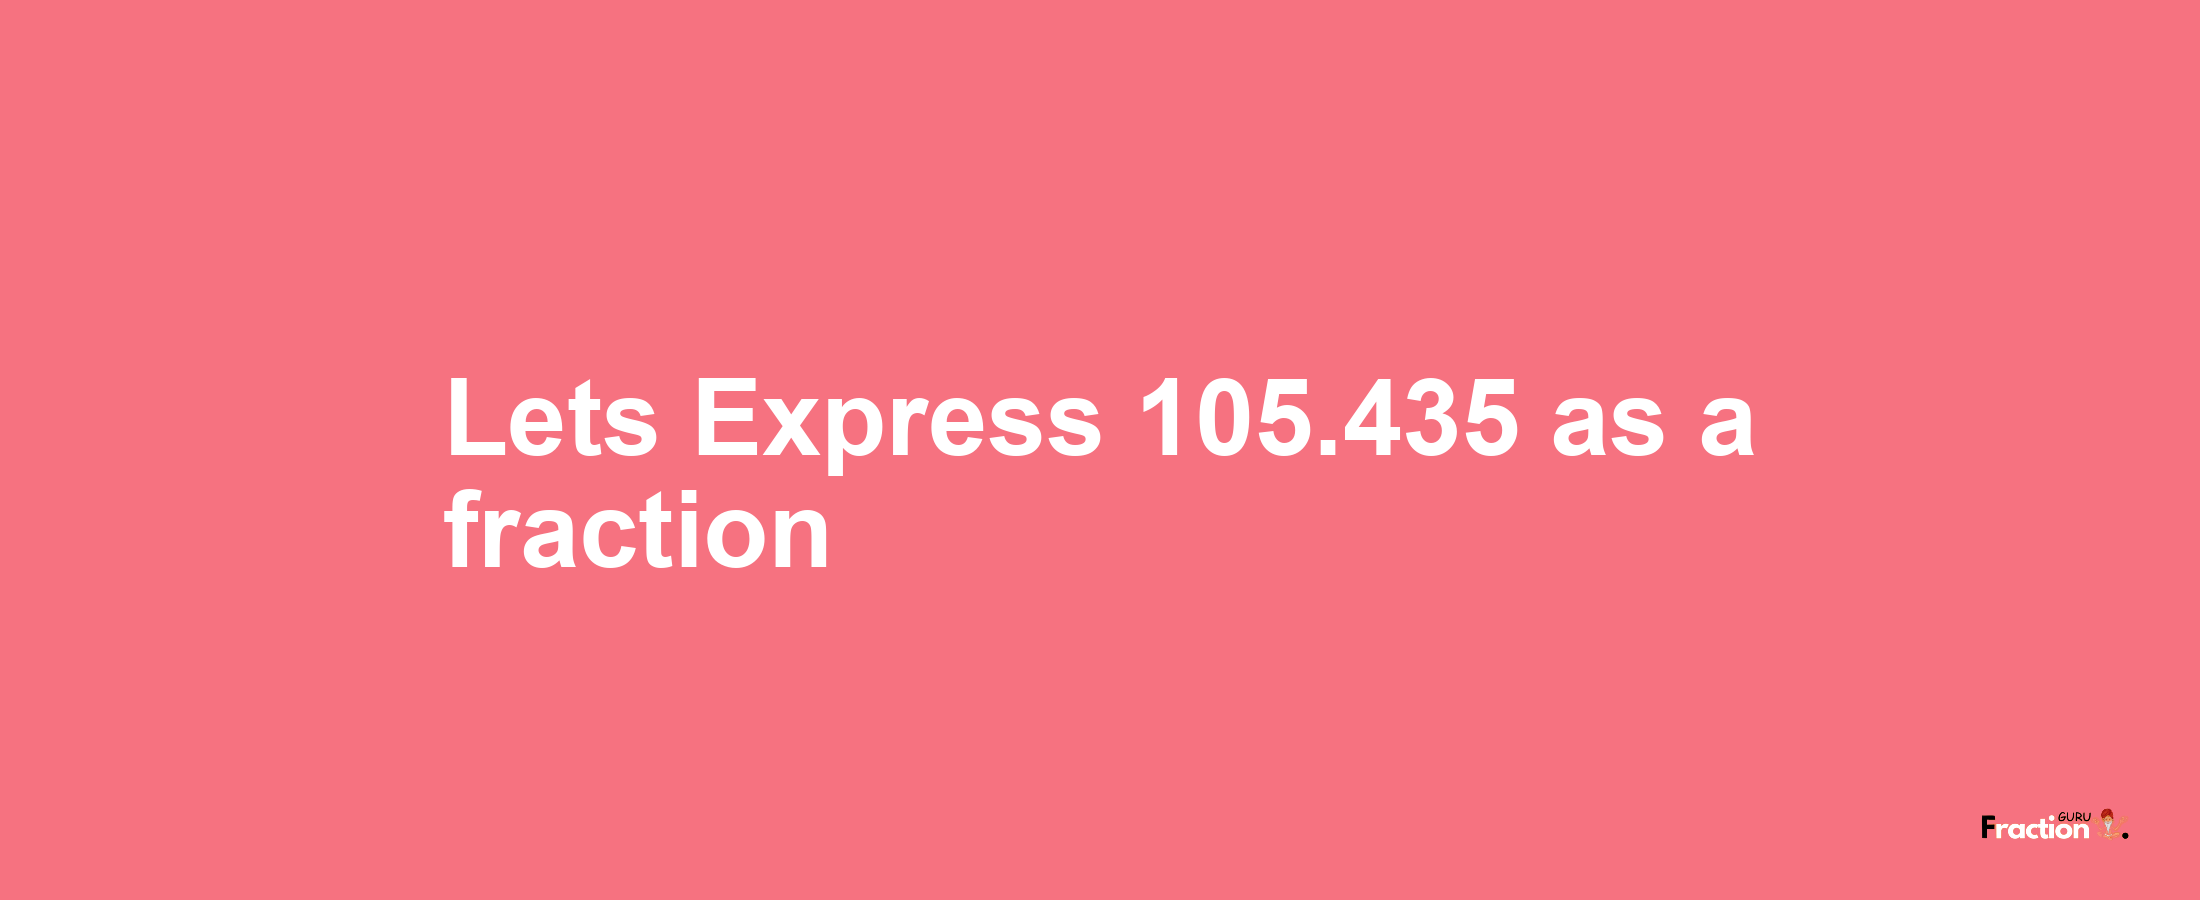 Lets Express 105.435 as afraction